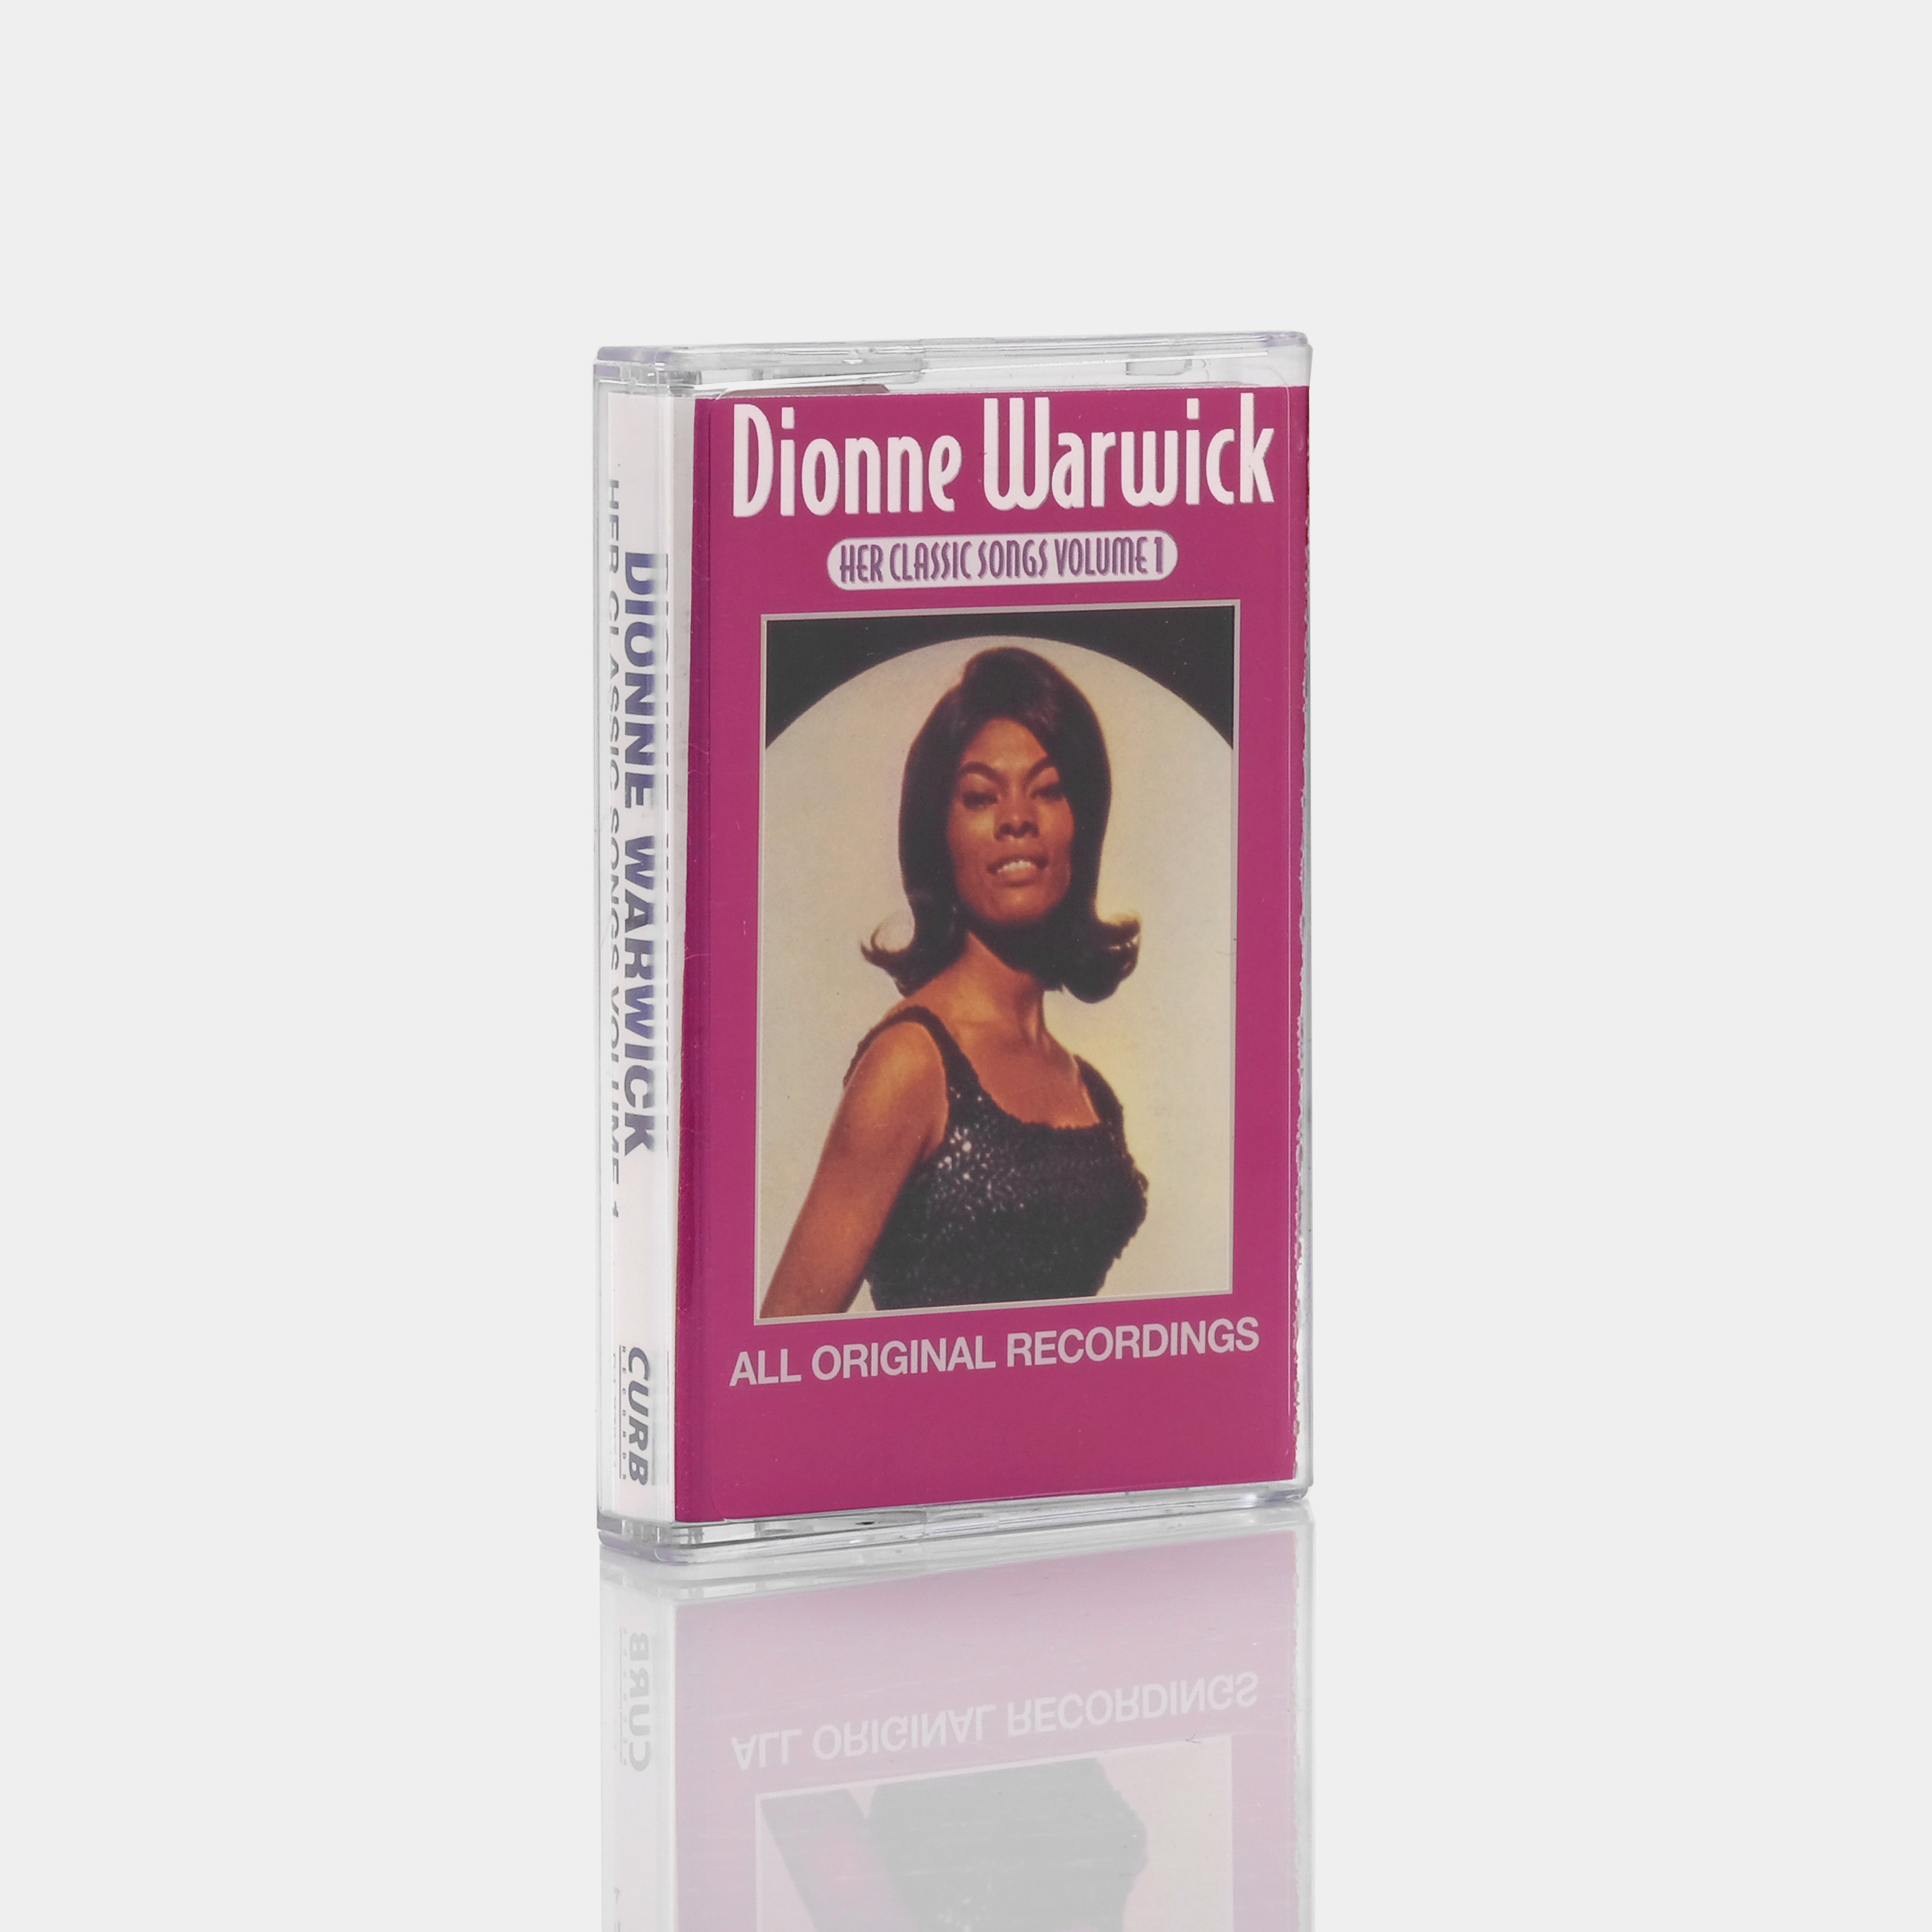 Dionne Warwick - Her Classic Songs Volume 1 Cassette Tape